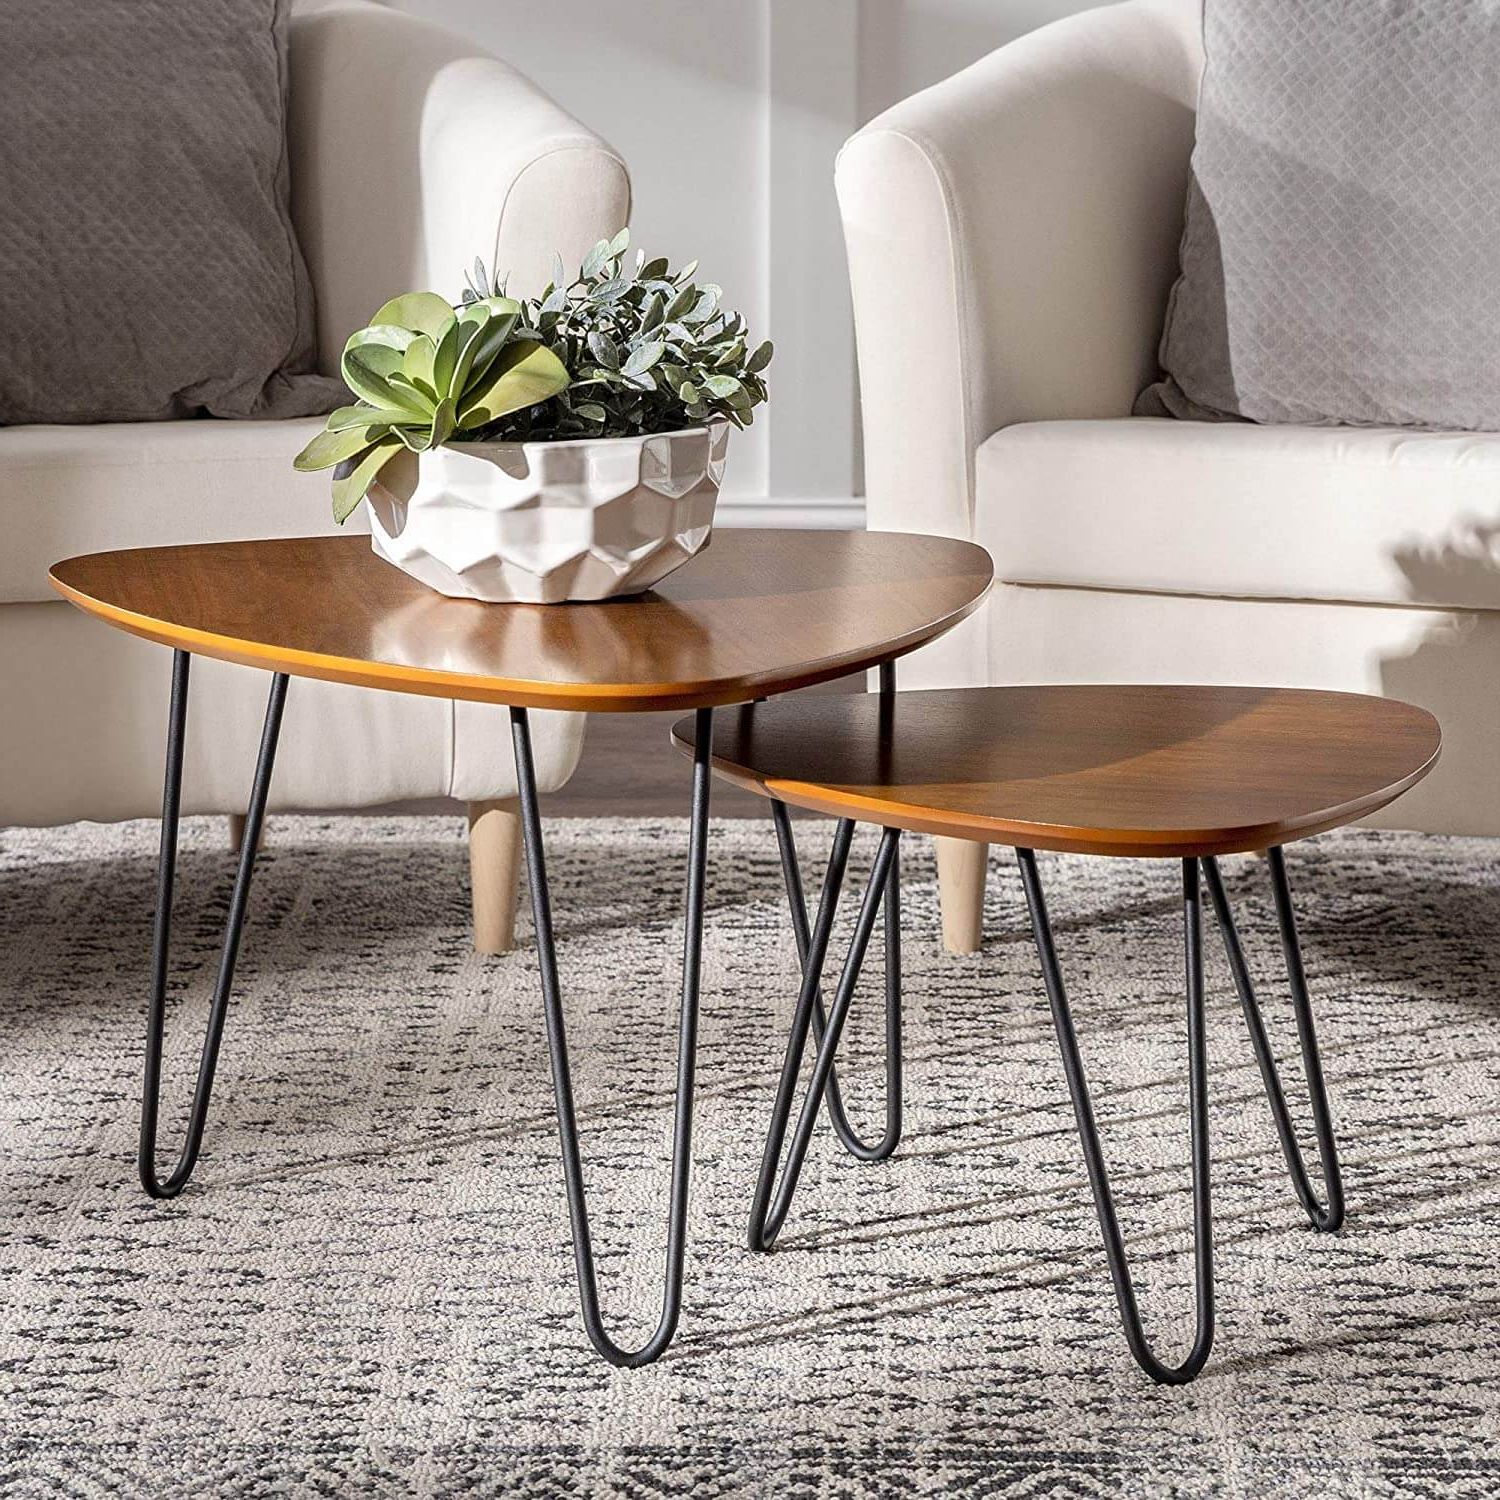 2019 Choosing The Perfect Mid Century Modern Coffee Table – Oceanone Interiors With Regard To Mid Century Modern Coffee Tables (View 11 of 15)